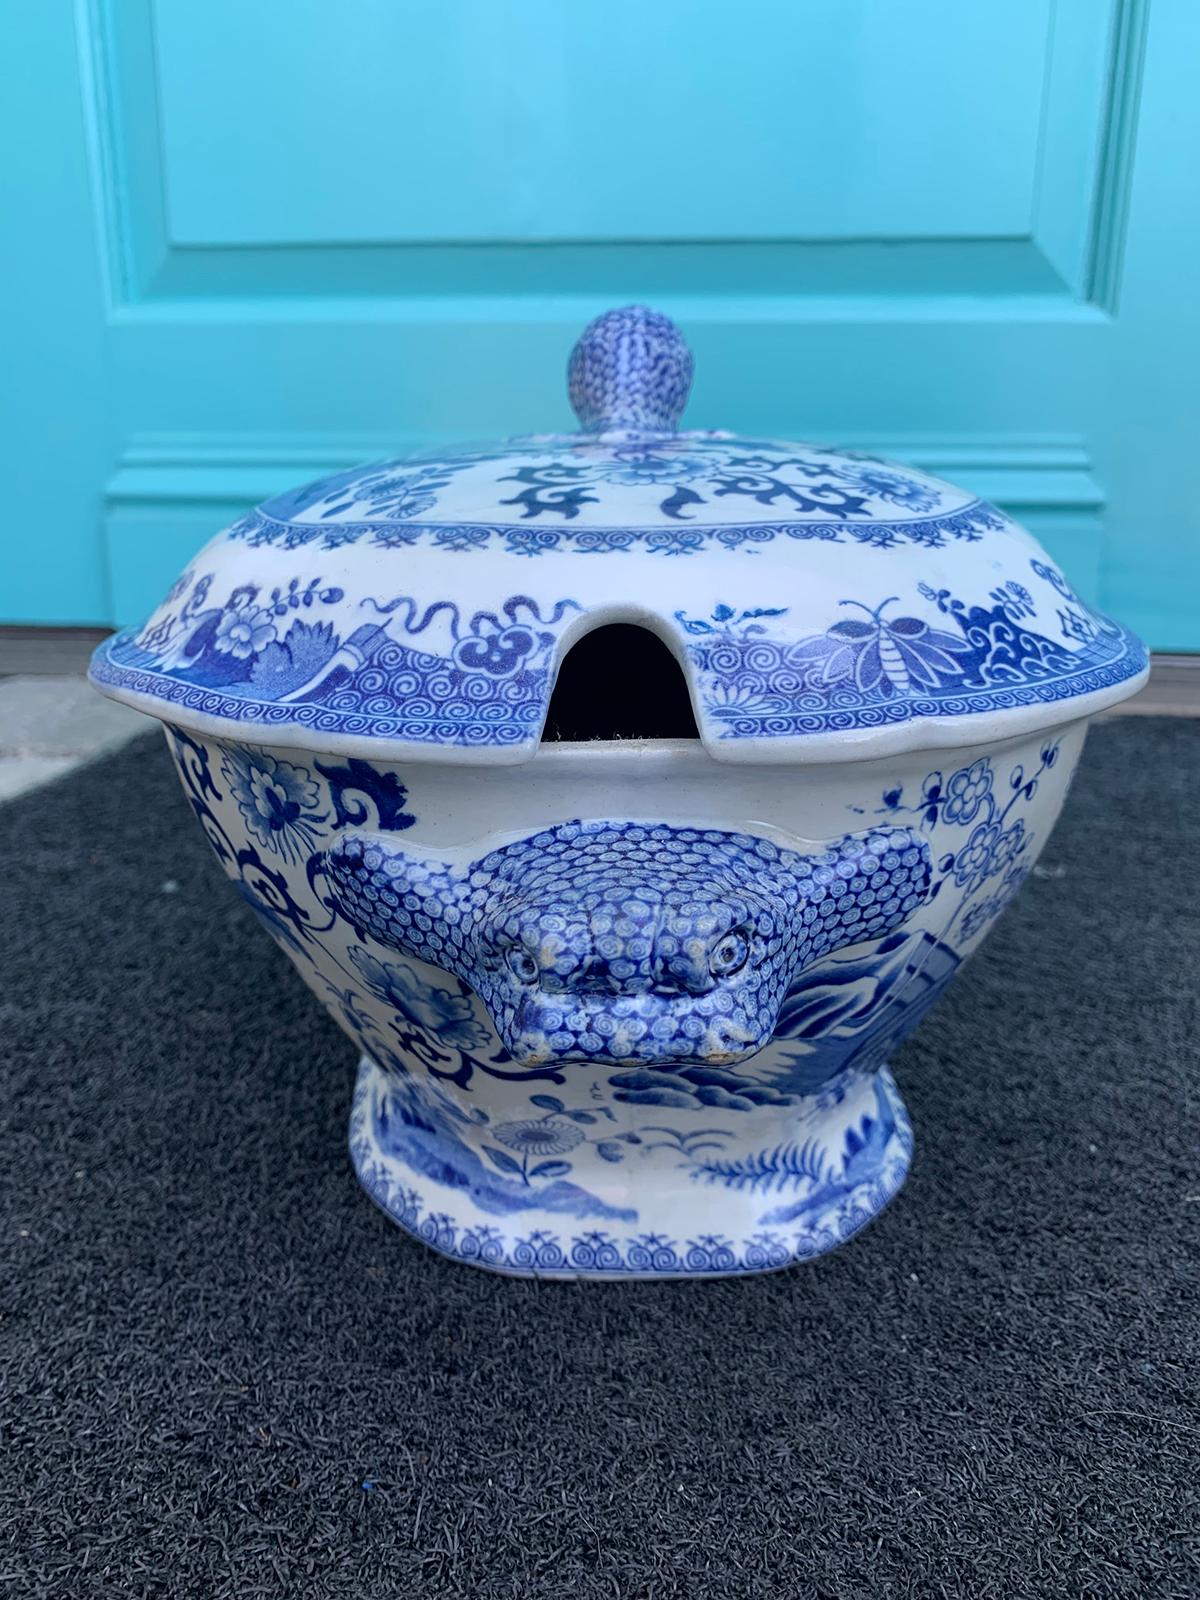 Porcelain Early 19th Century Spode Blue and White Tureen